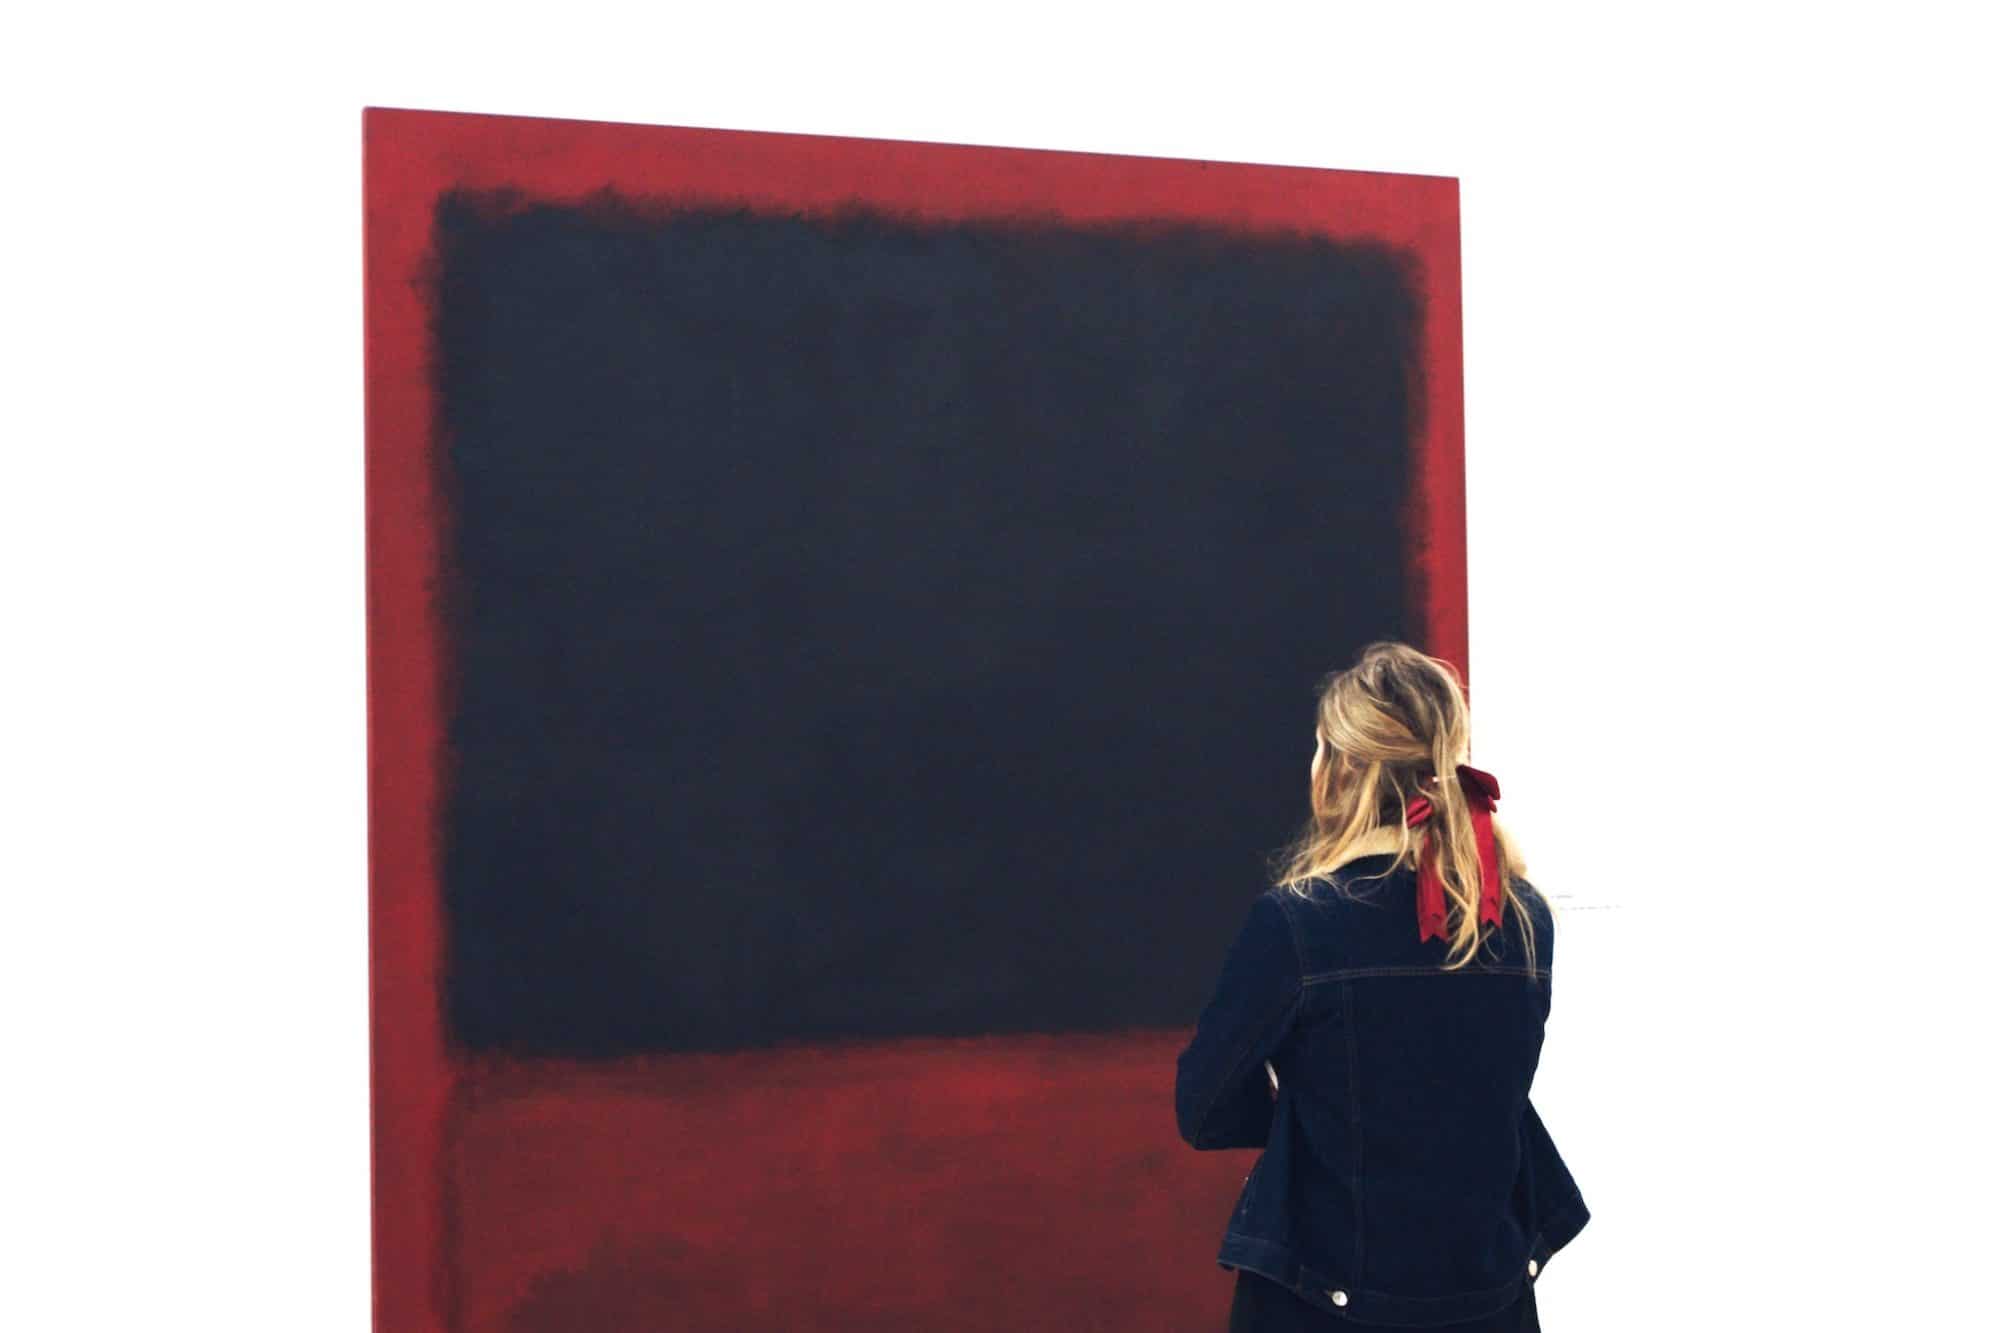 A blonde woman standing infant of a Rothko painting. She's wearing a denim jacket and has a red ribbon in her hair. The Rothko painting is dark red with a black square.